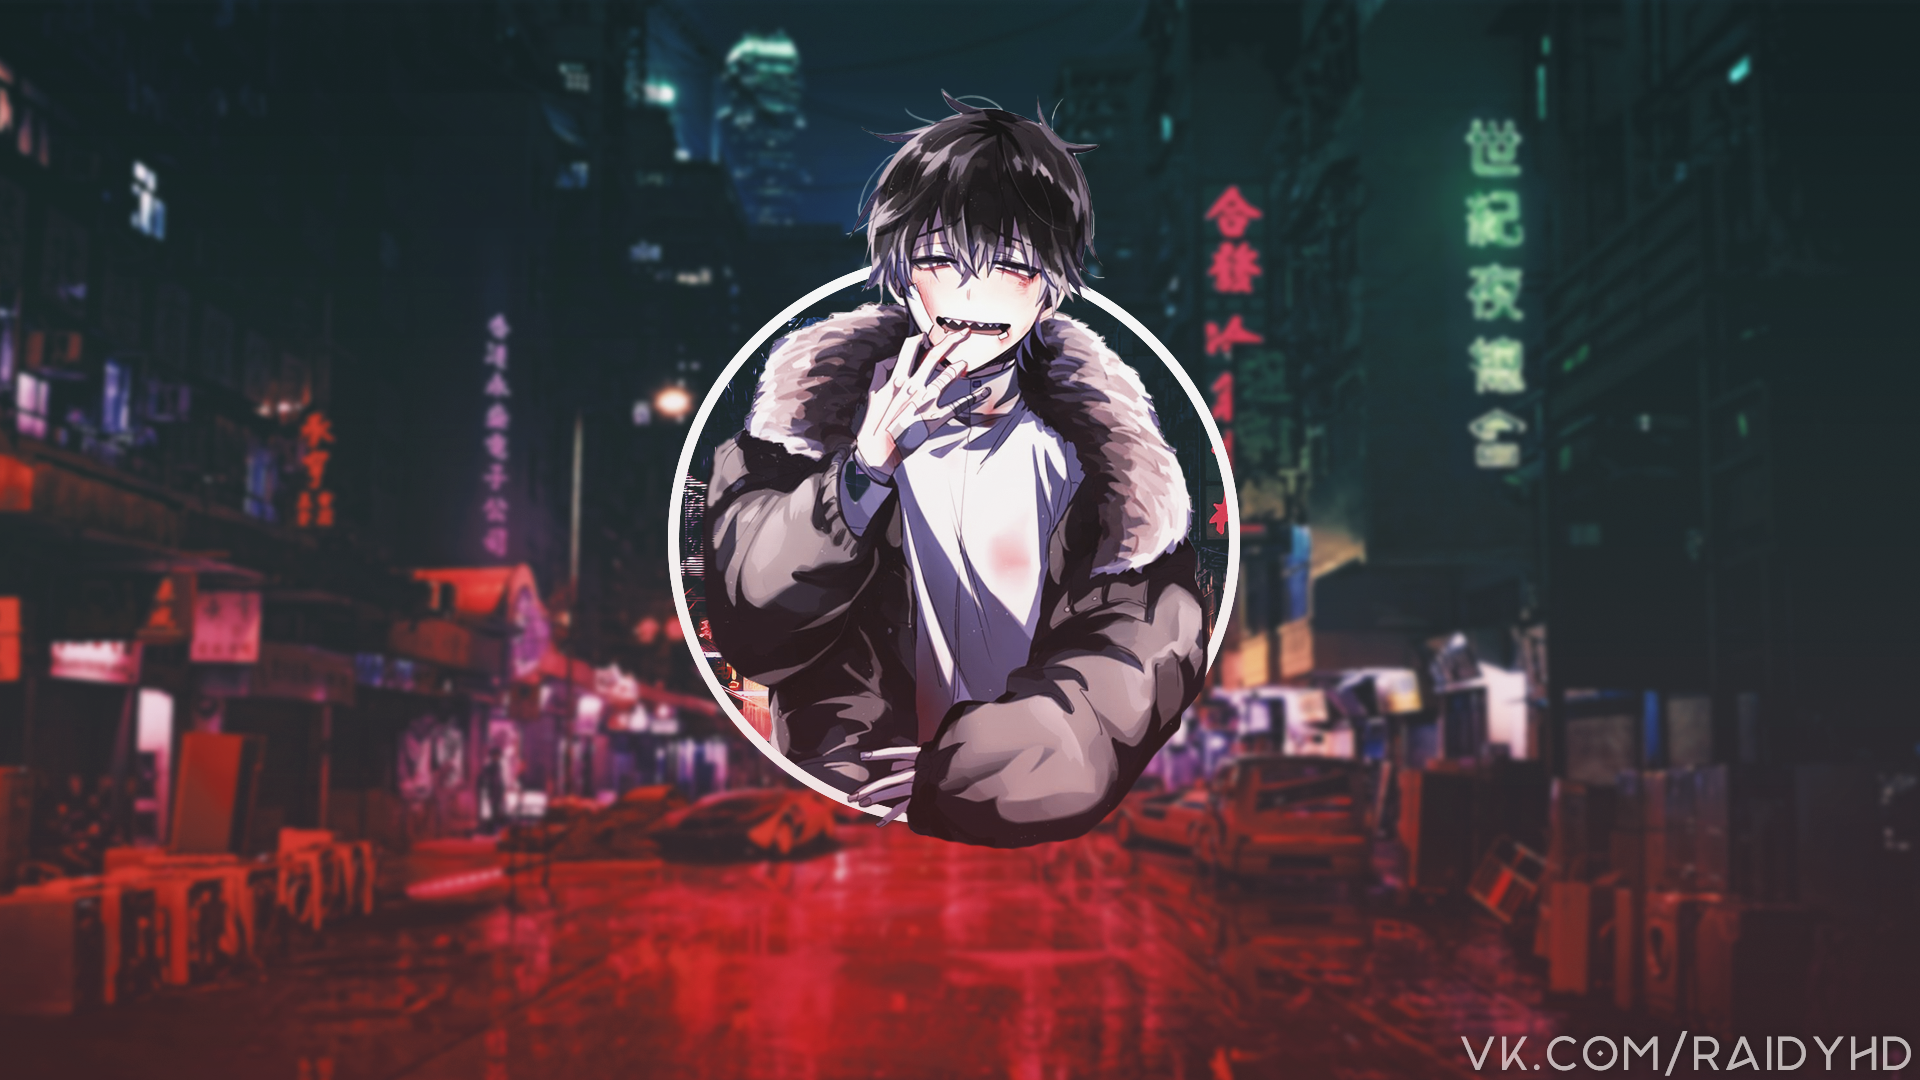 Anime 1920x1080 anime picture-in-picture anime boys jacket bandages city watermarked